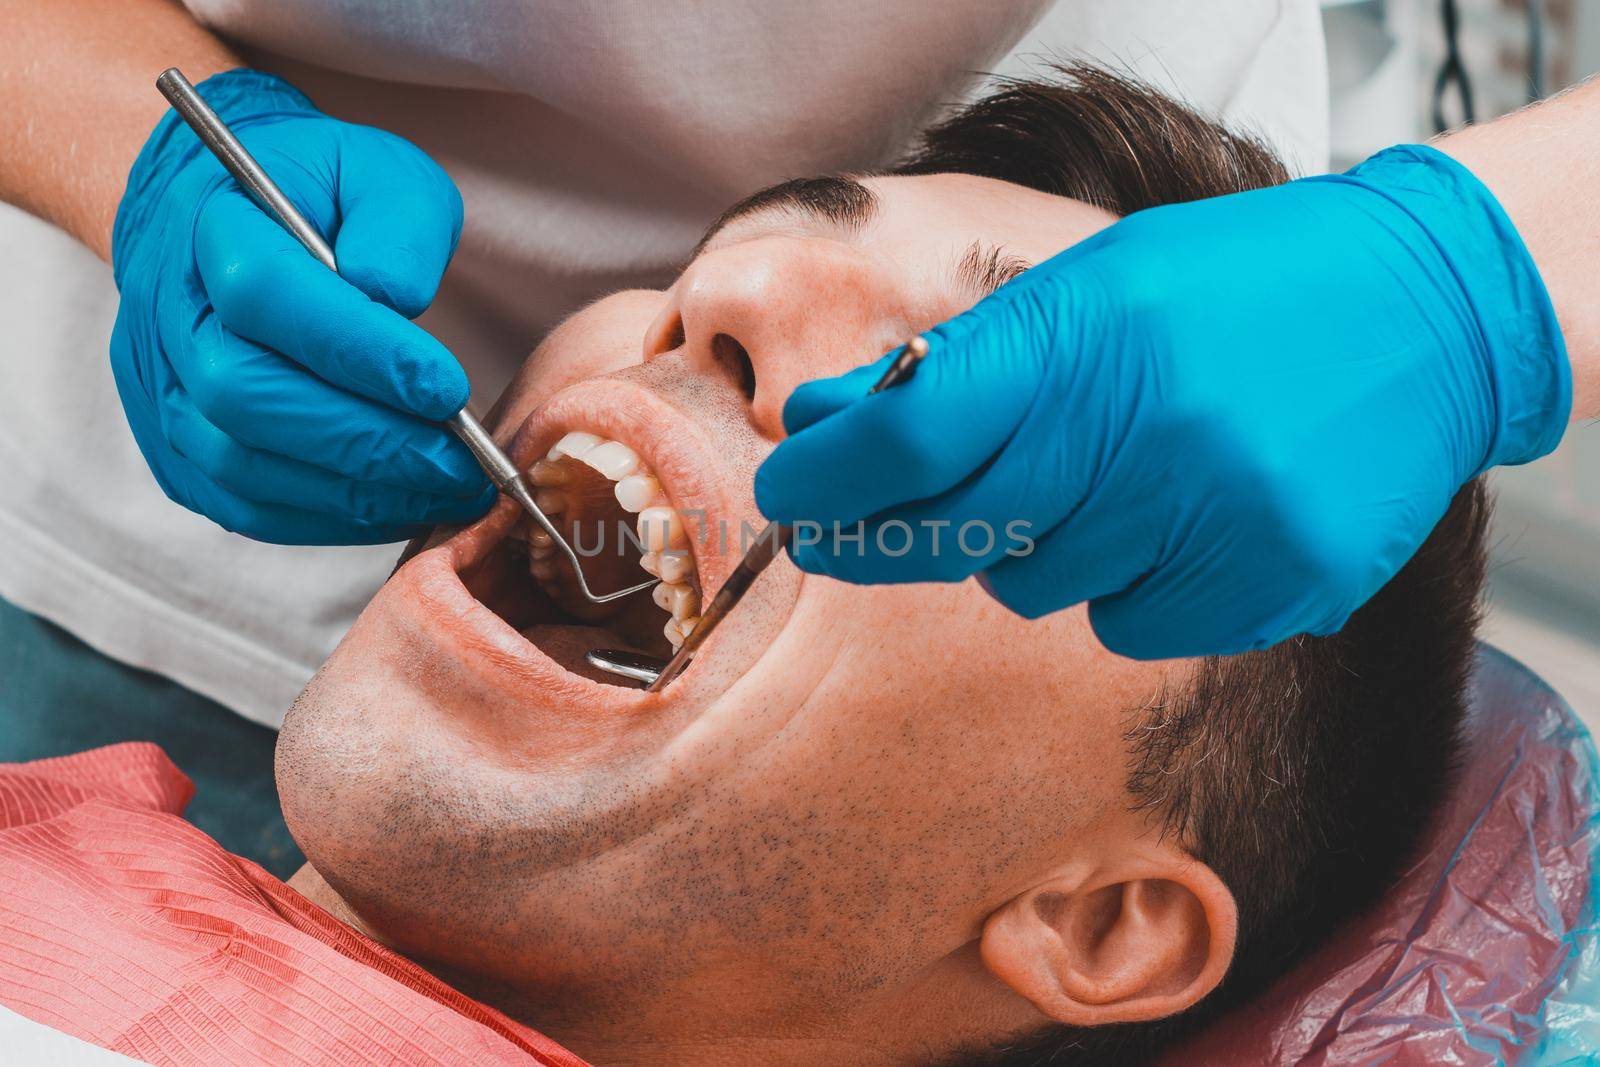 Dental clinic, the patient sits in a dental chair with his mouth wide open, the dentist assesses the condition of the teeth and makes a diagnosis. by Niko_Cingaryuk